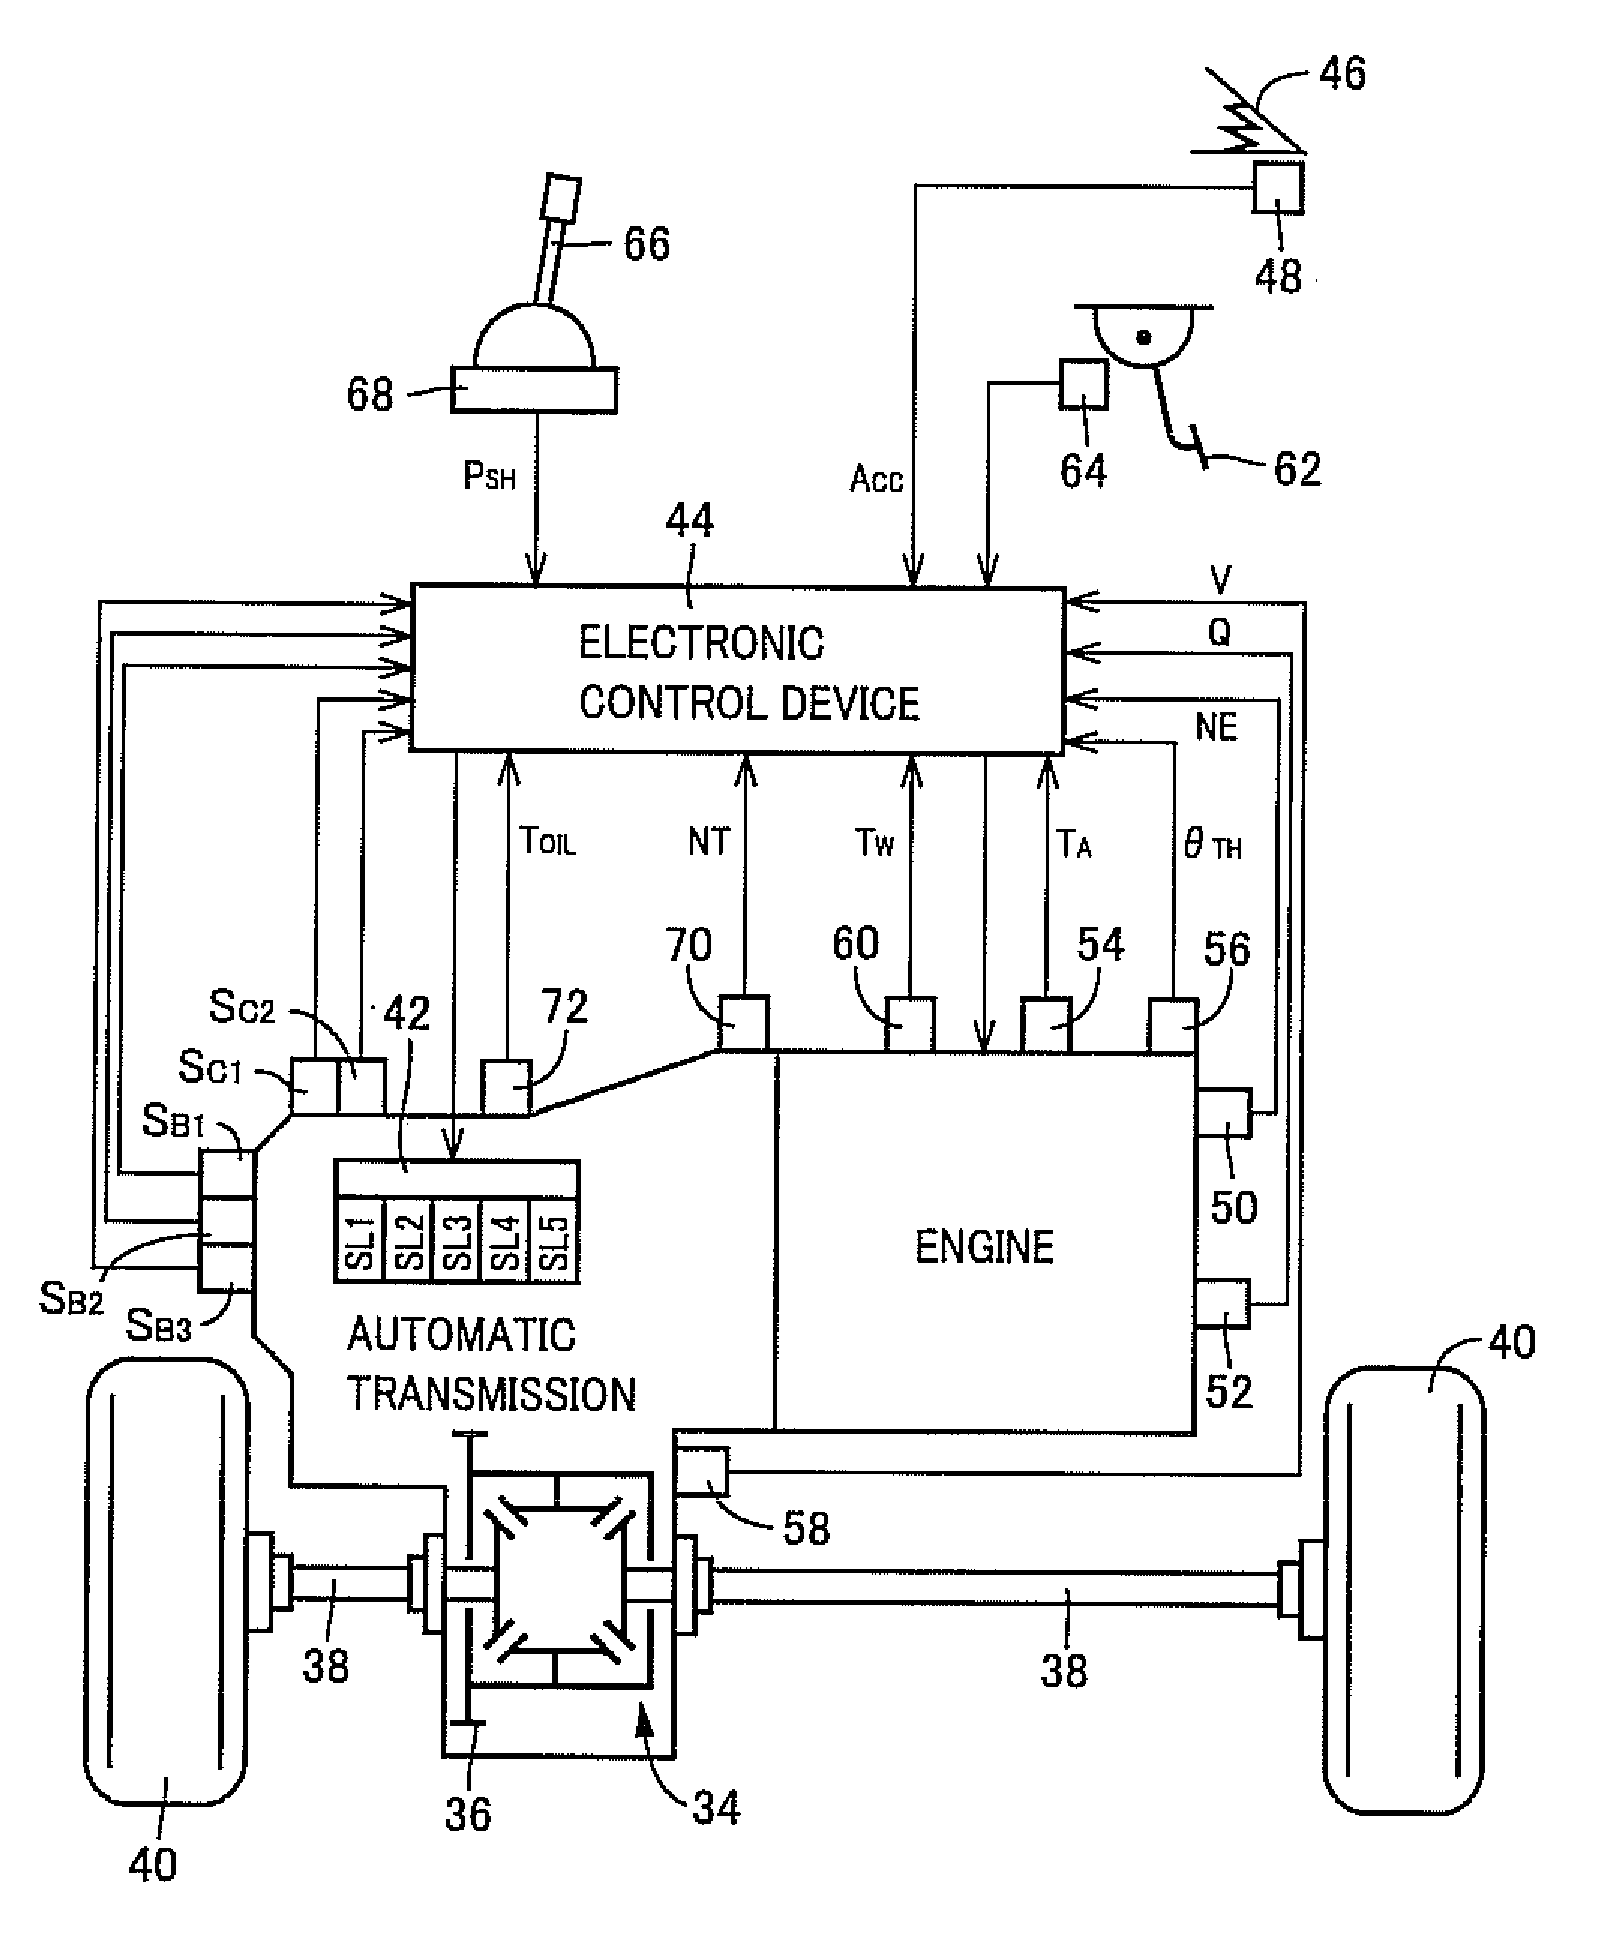 Control device for vehicular automatic transmission